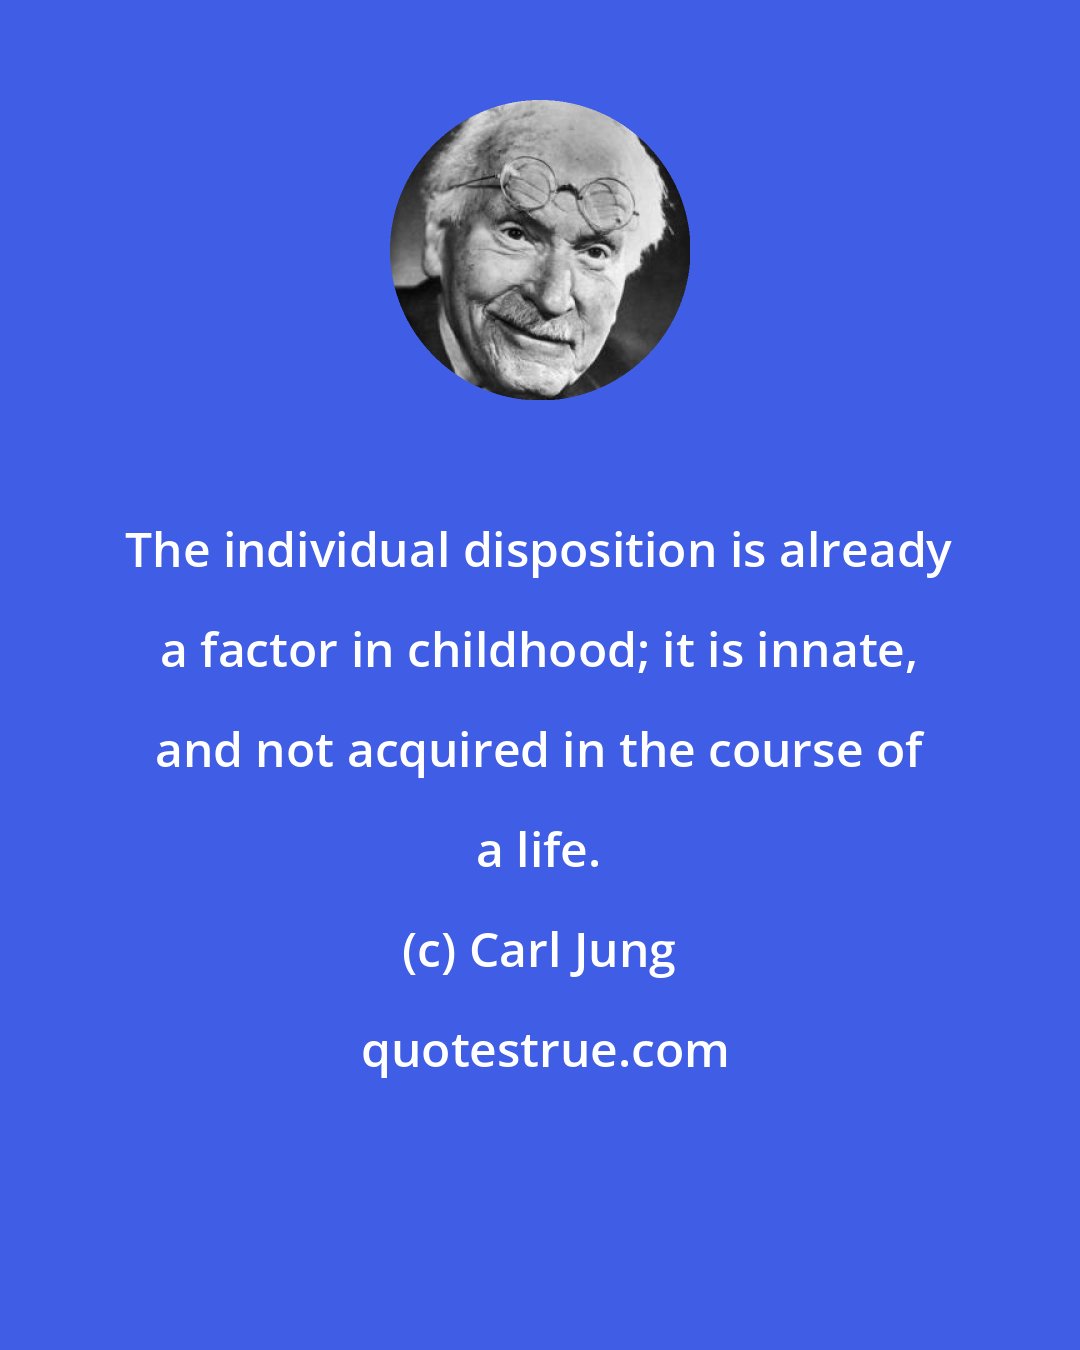 Carl Jung: The individual disposition is already a factor in childhood; it is innate, and not acquired in the course of a life.